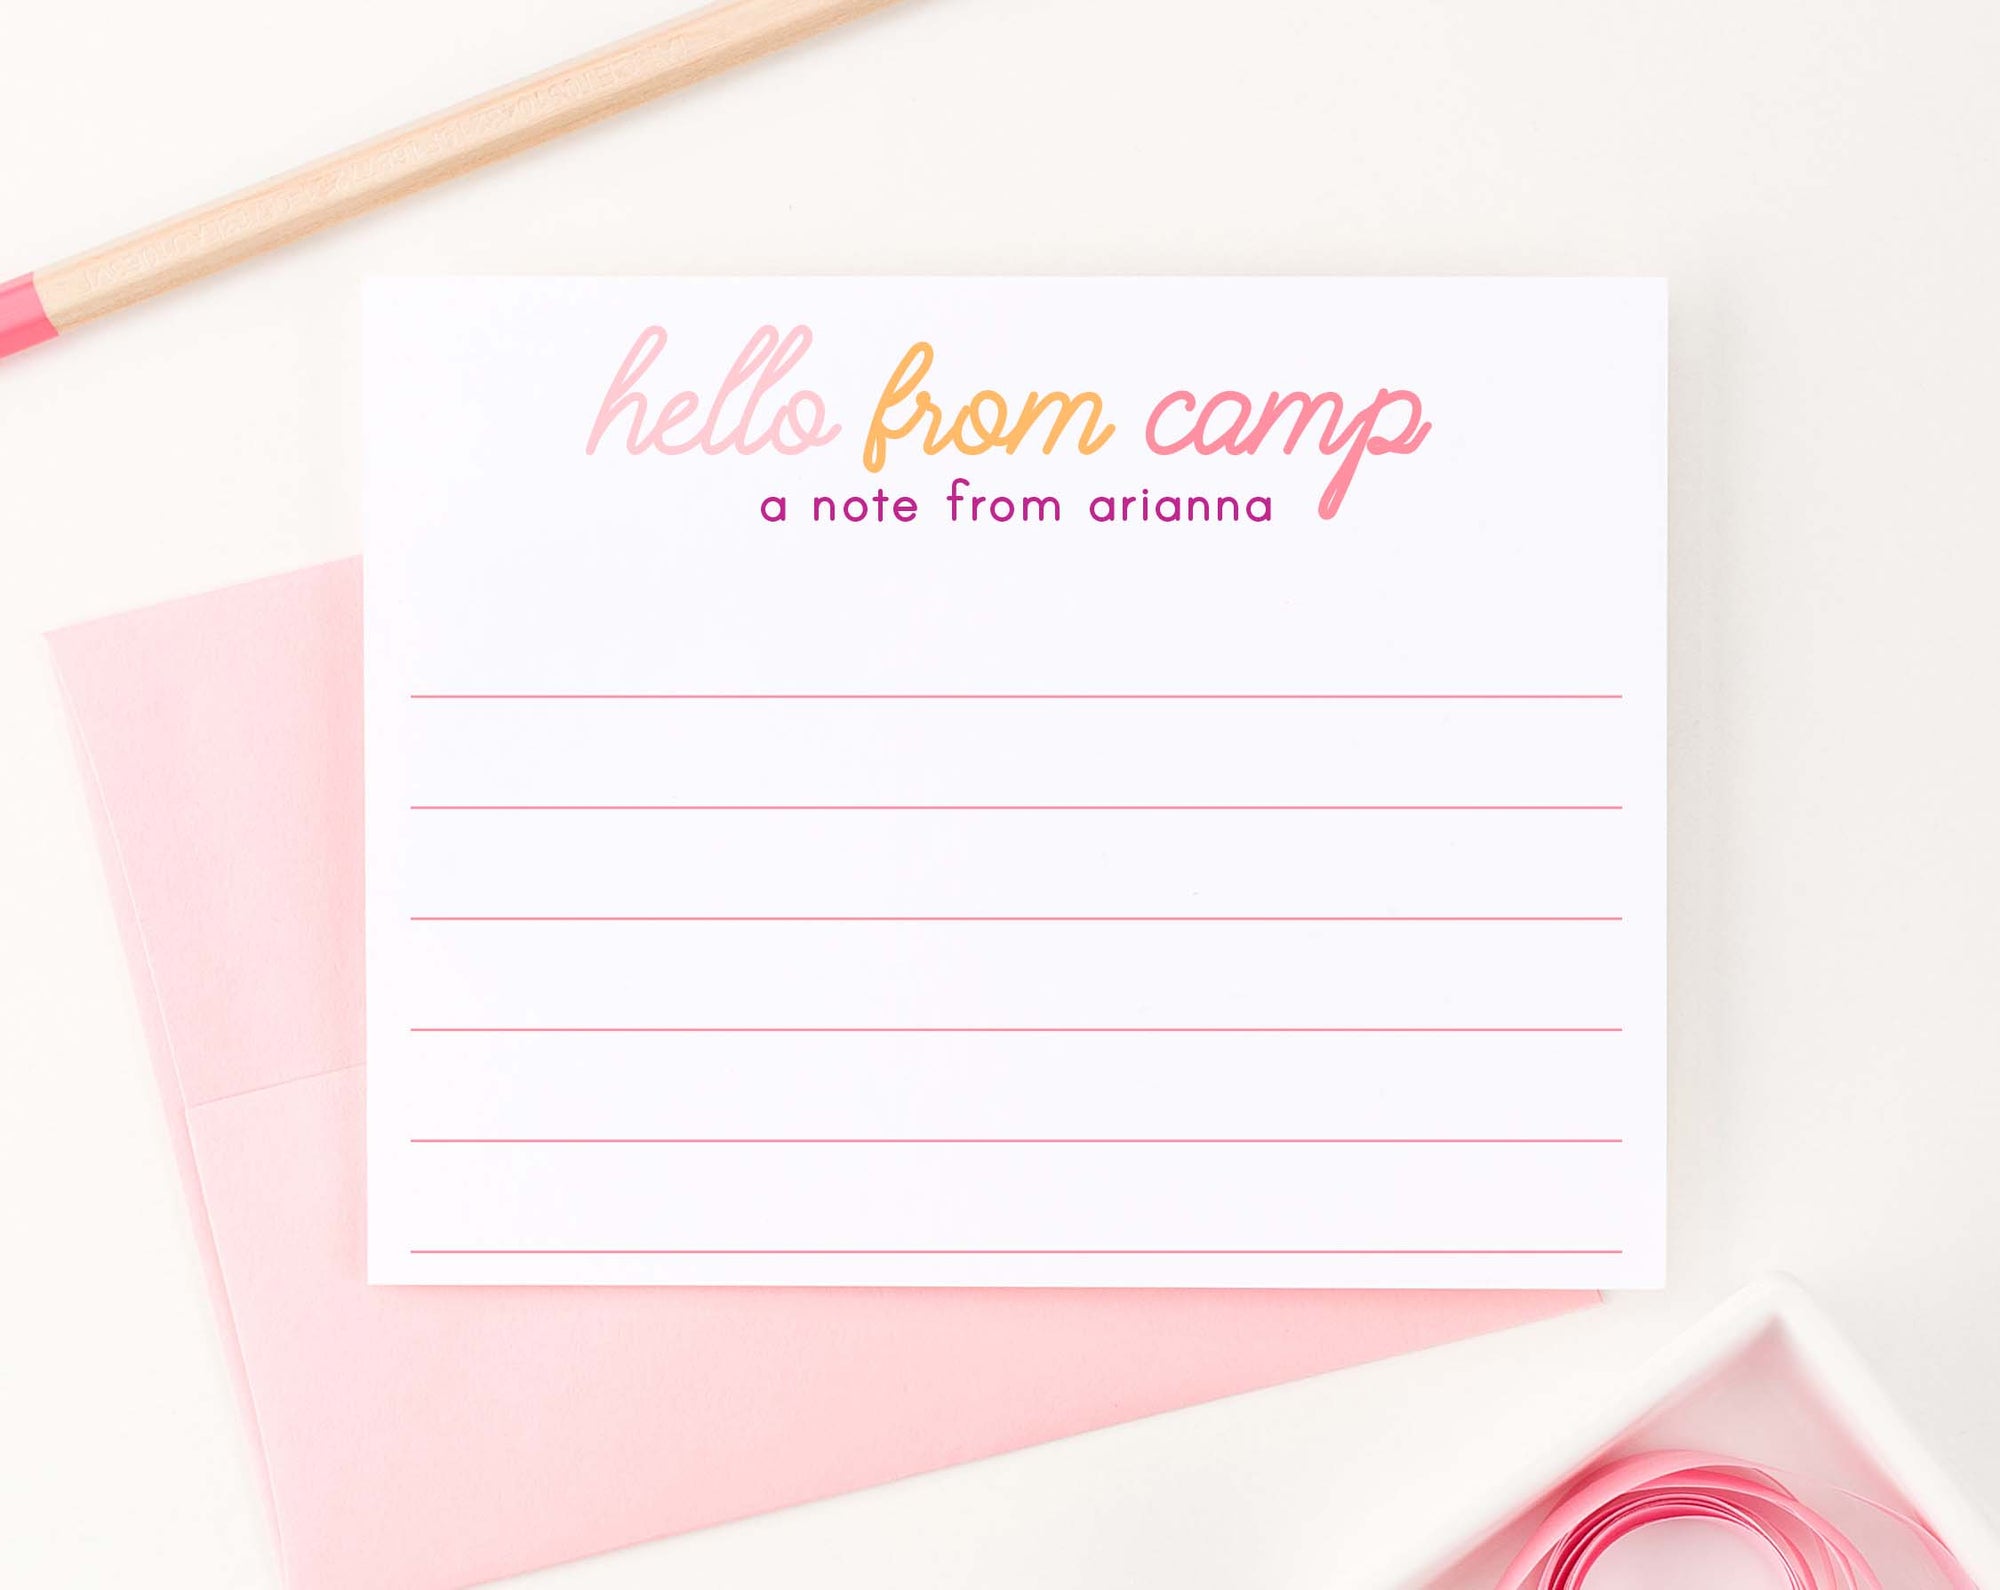 Camp Letter Writing Set Personalized Camp Lined Stationery Paper